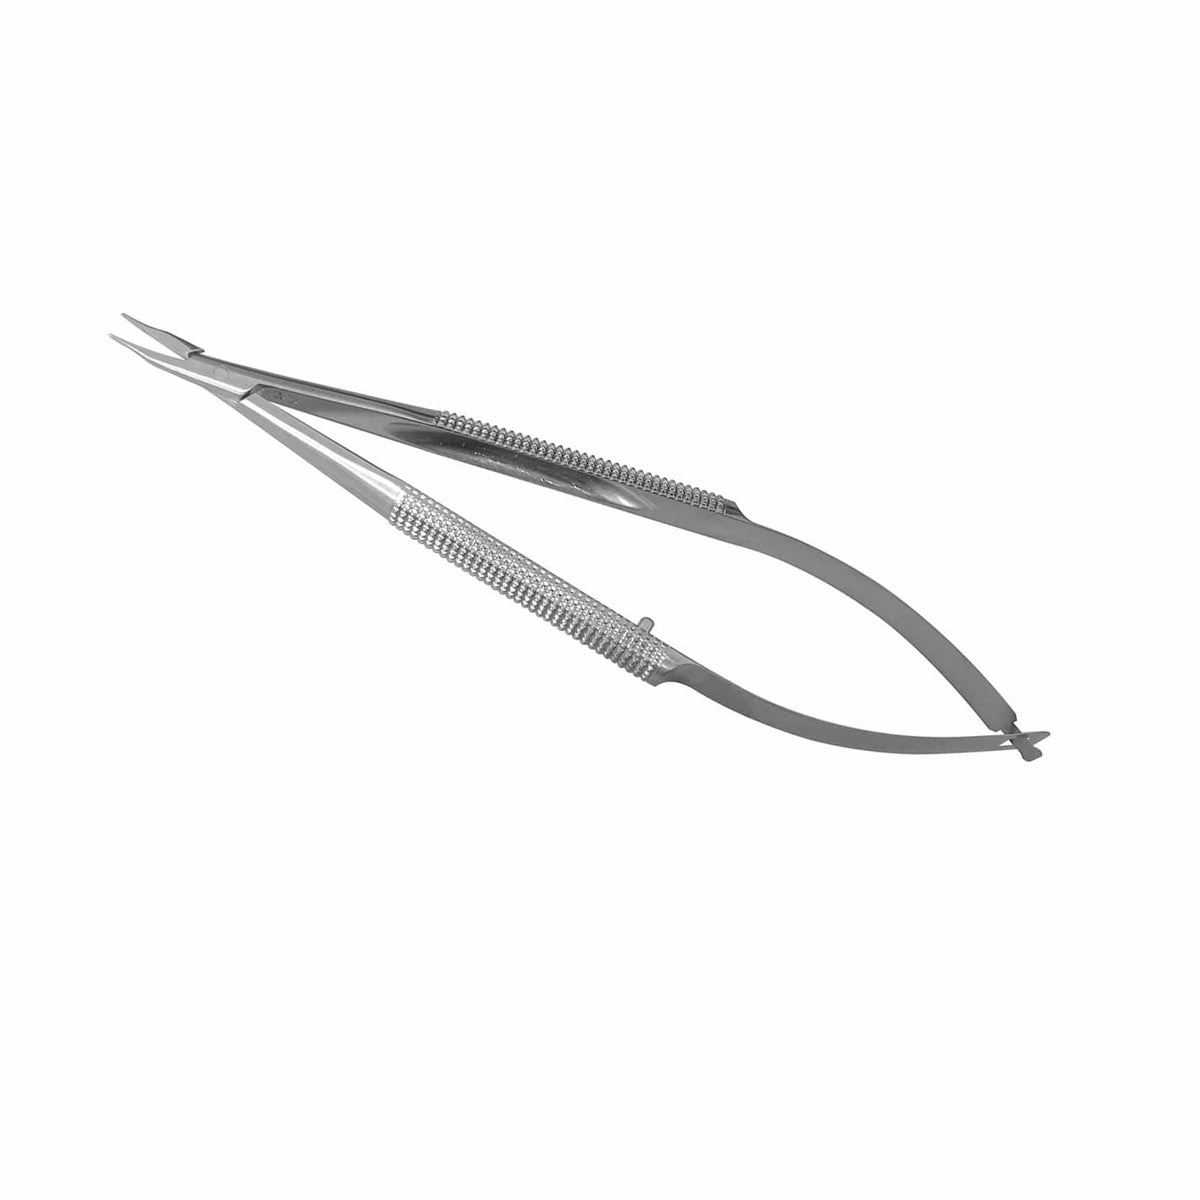 Armo Surgical Instruments Armo Barraquer Needle Holder